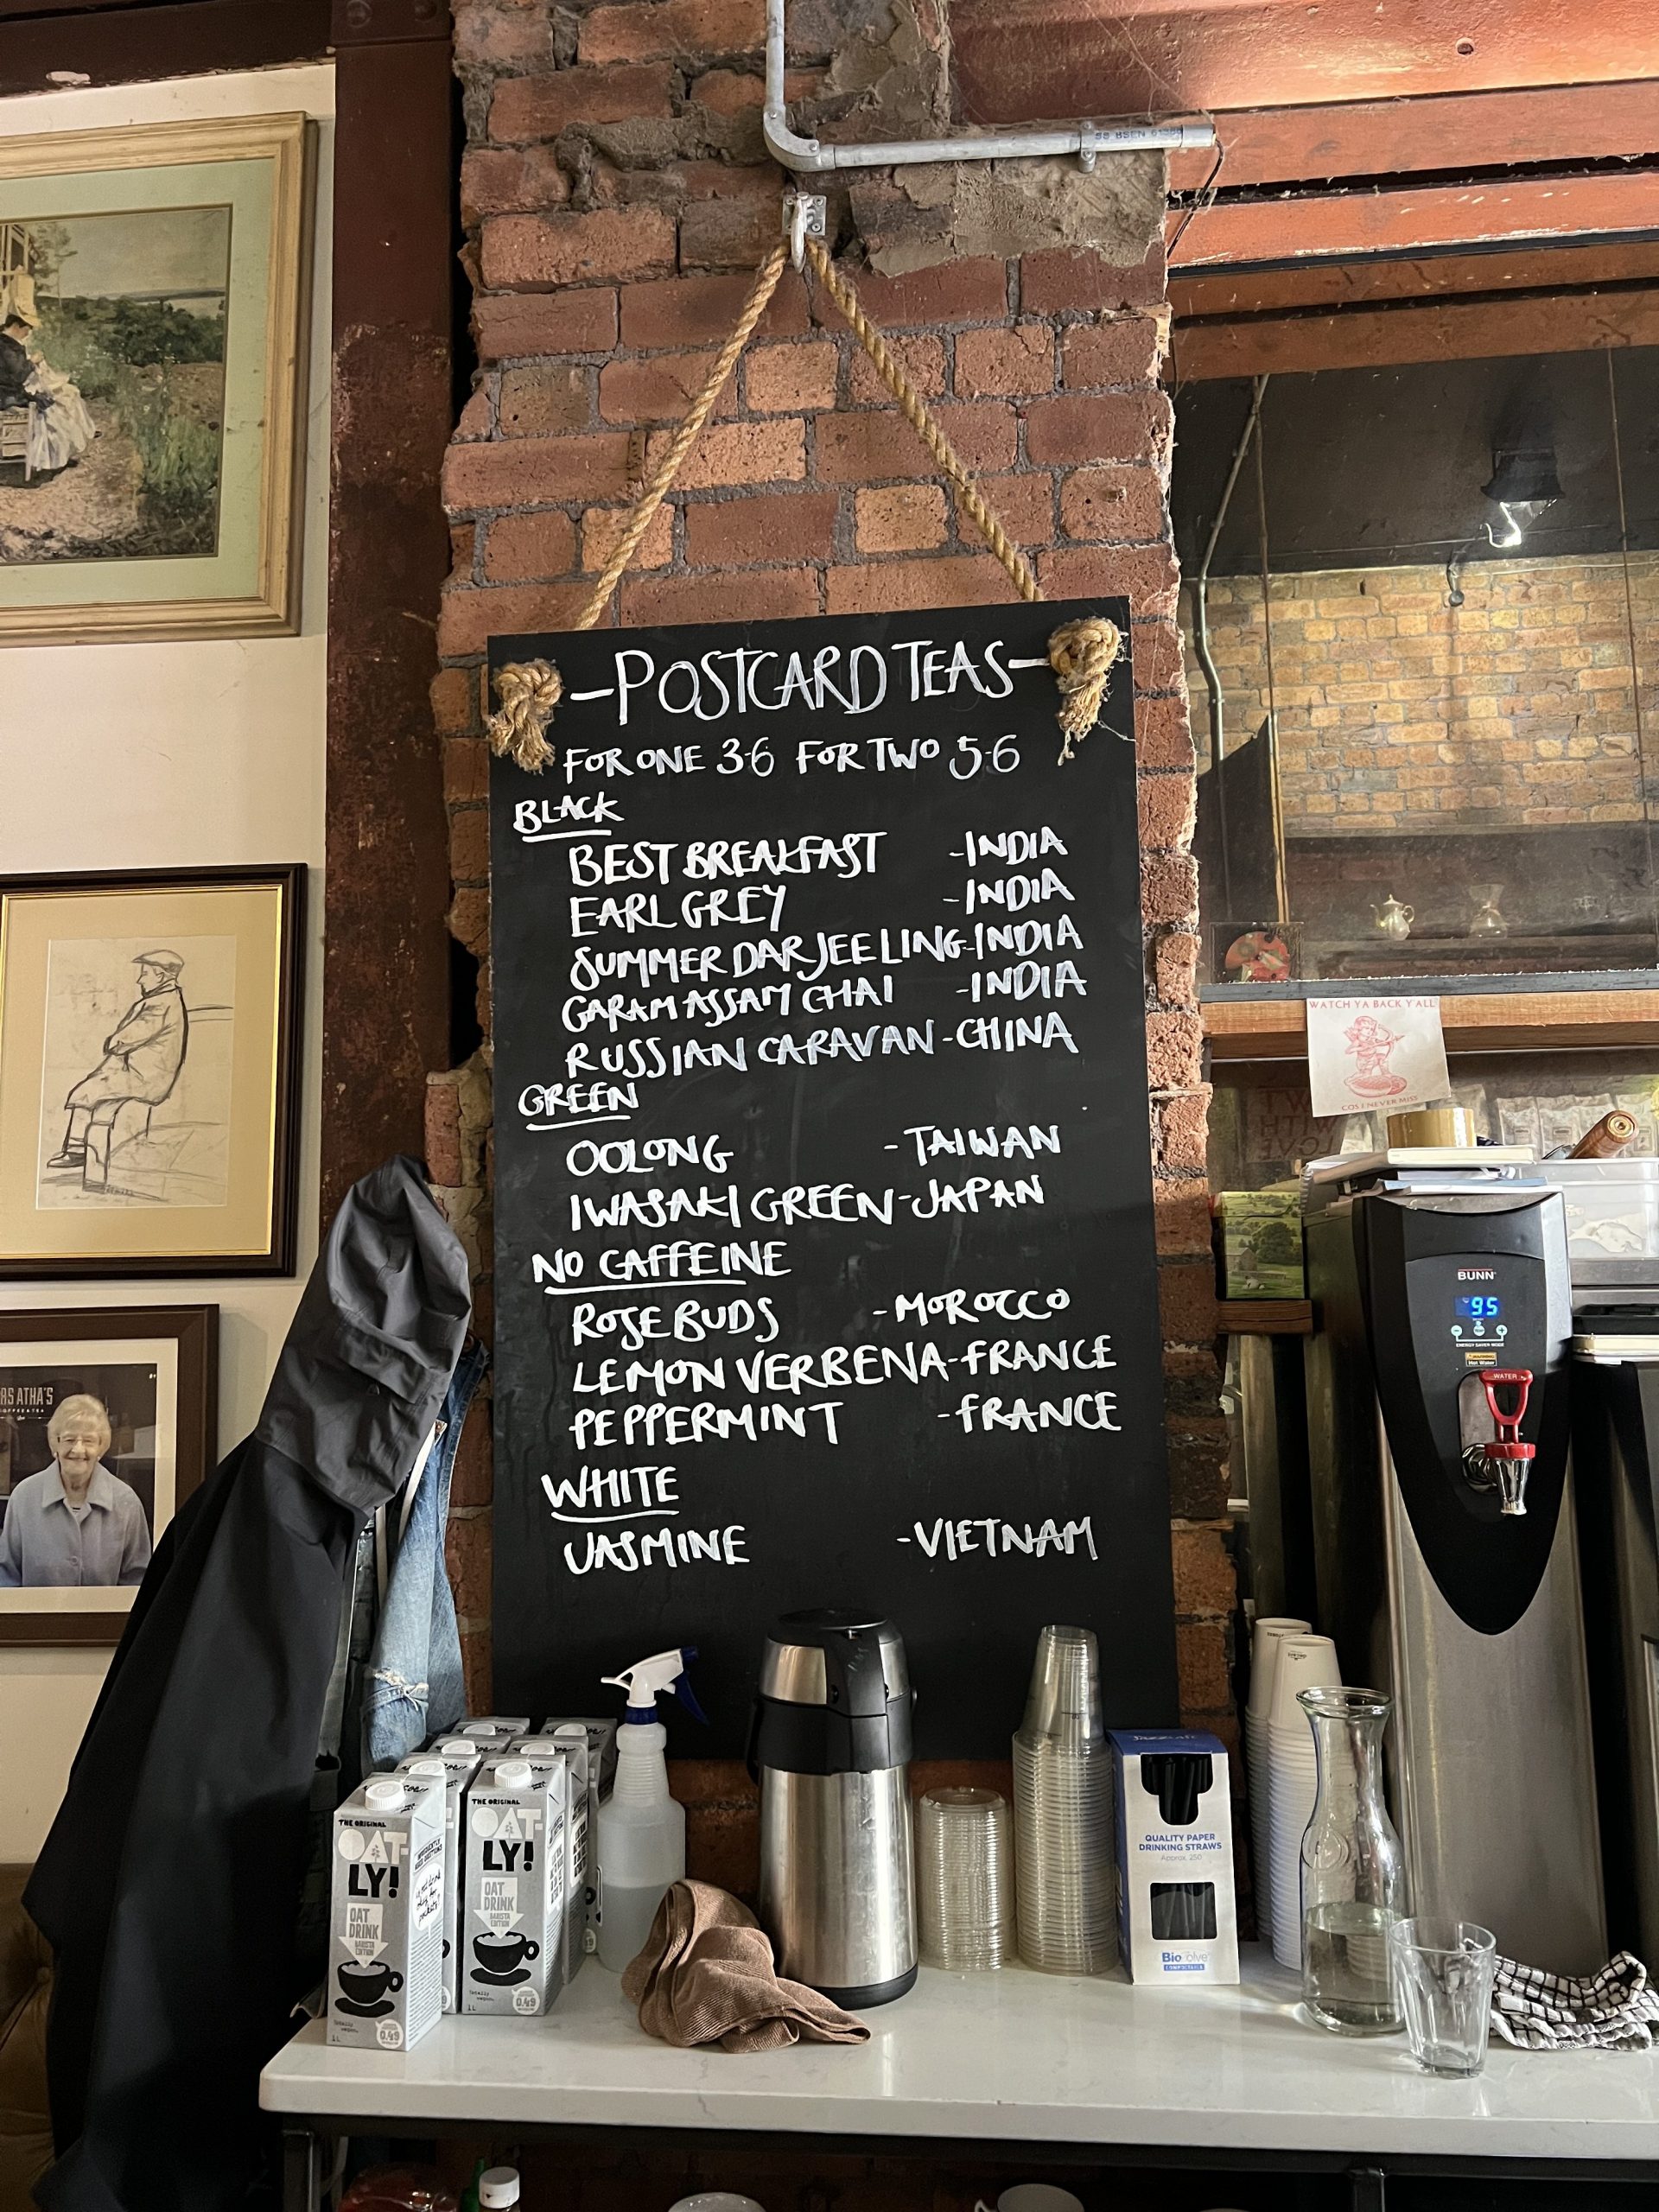 a chalkboard sign with different tea options including rose buds, jasmine and best breakfast.